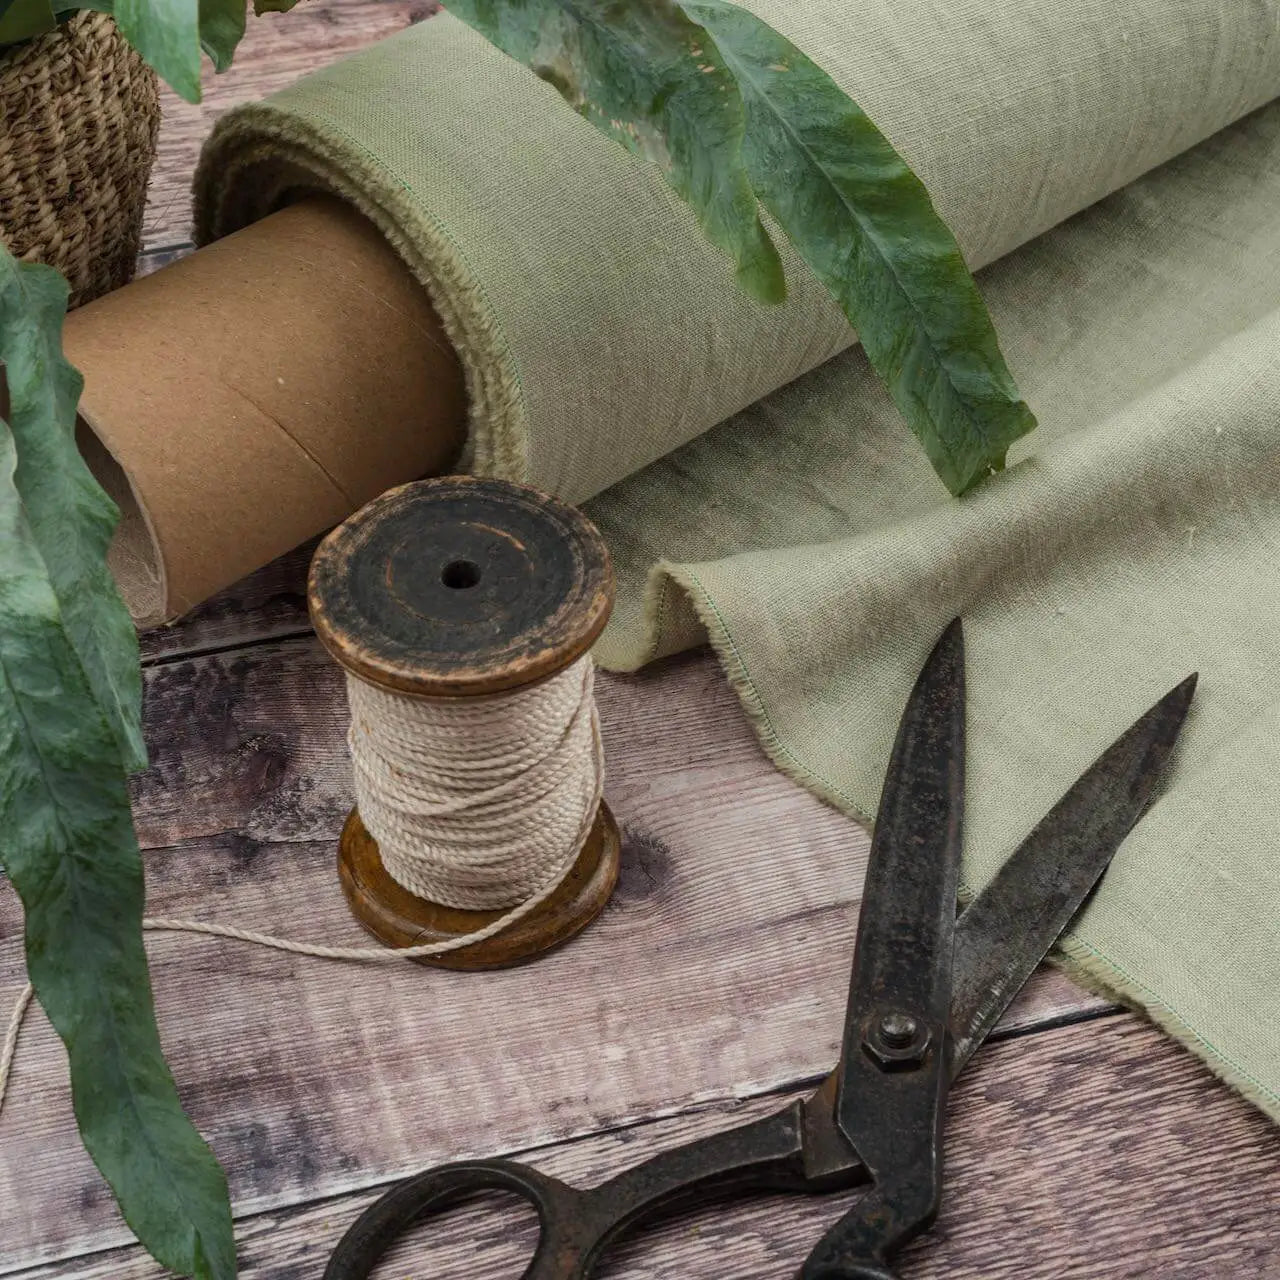 Washed Pure Light Sage Green Linen Fabric 205 g/m²